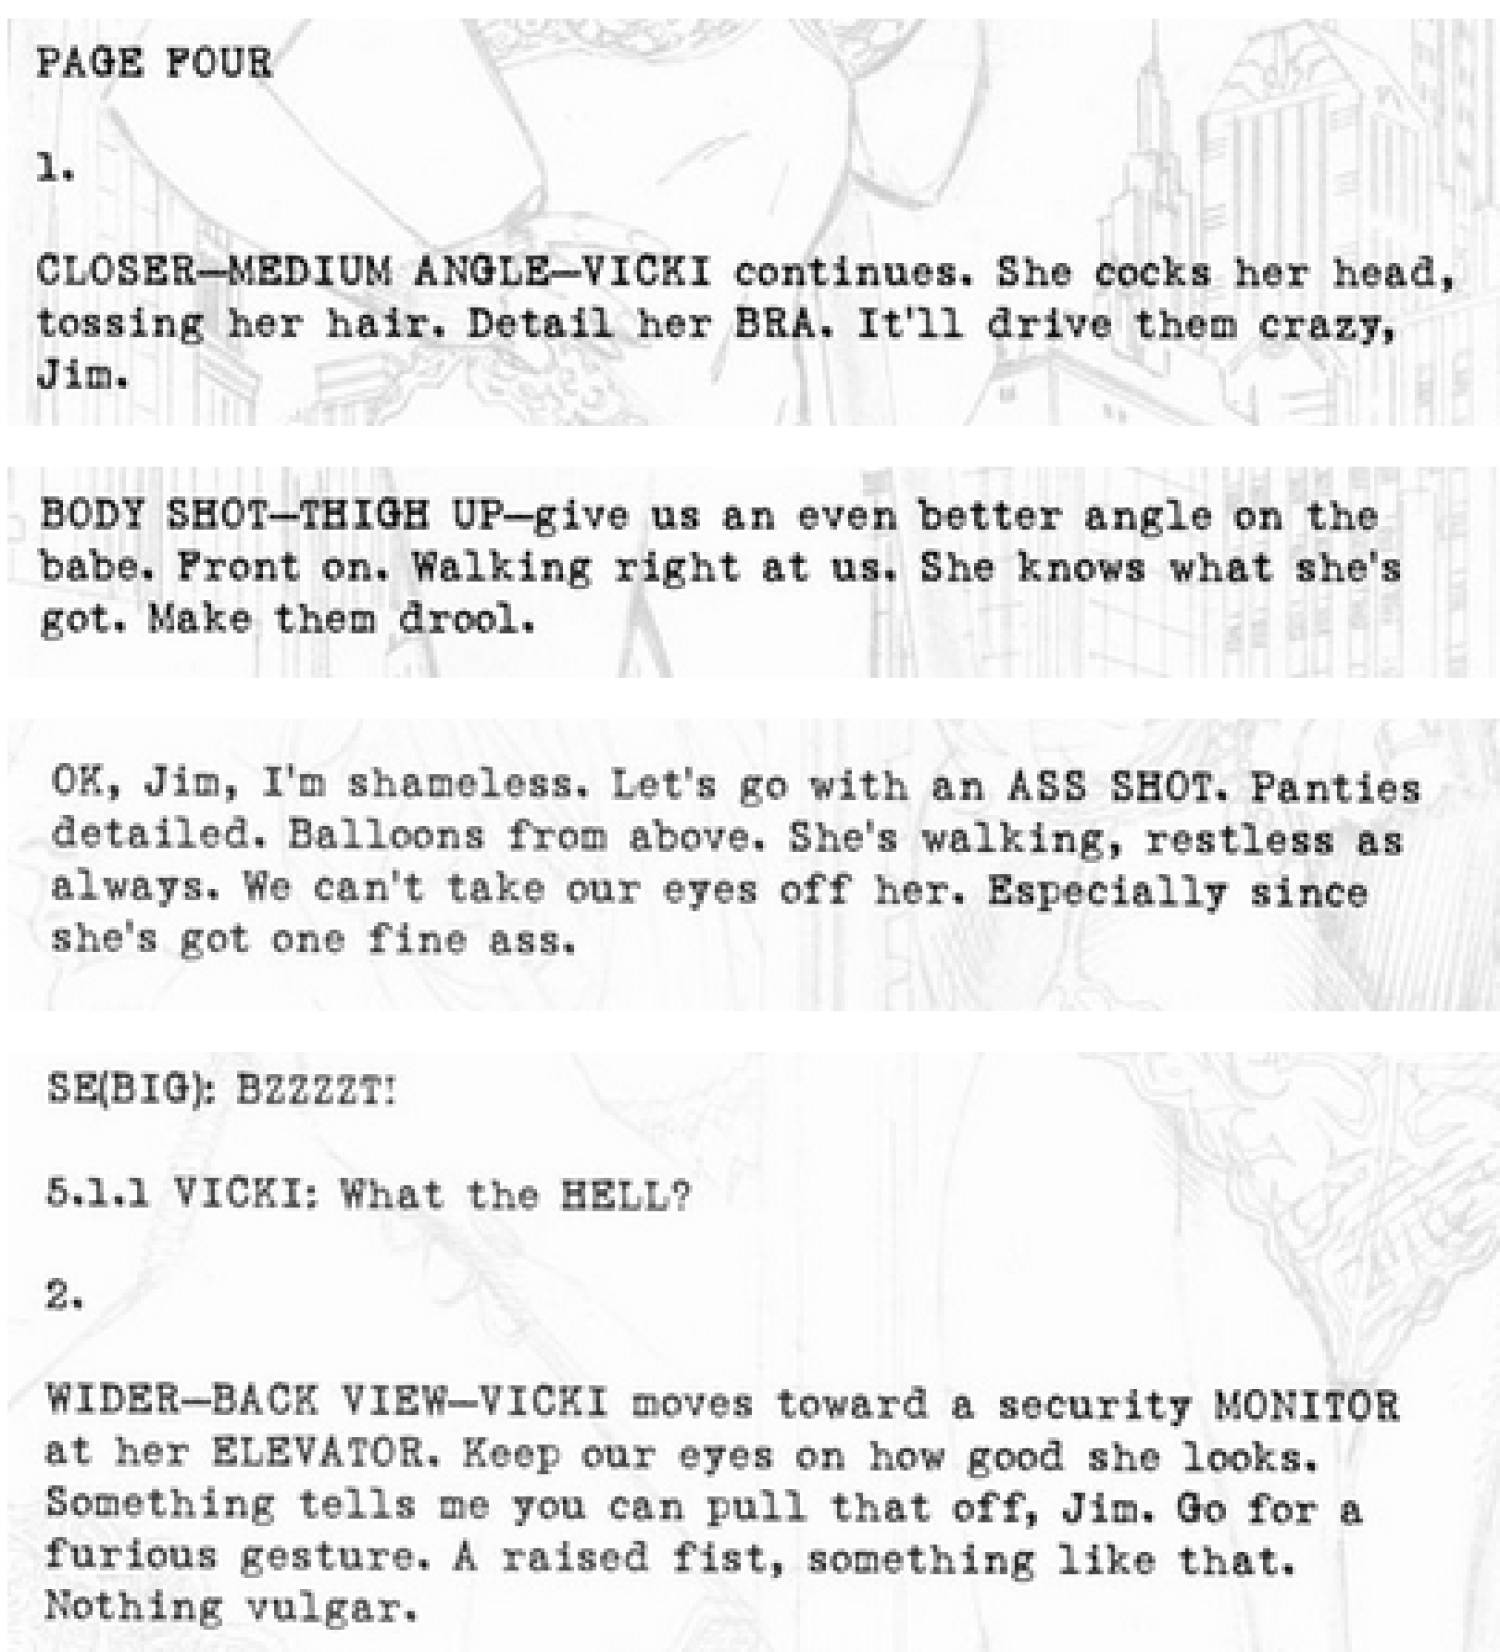 image of script notes from Frank Miller to Jim Lee of All Star Batman and Robin #1, that reads: Page Four: 1. Closer - Medium Angle - Vicki continues. She cocks her head, tossing her hair. Detail her BRA. It'll drive them crazy, Jim. Body Shot - Thigh Up - give us an even better angle on the babe. Front on. Walking right at us. She knows what she's got. Make them drool. Ok, Jim, I'm shameless. Let's go with an ASS SHOT. Panties detailed. Balloons from above. She's walking, restless as always. We can't take our eyes off her. Especially since she's got one fine ass. SE(BIG): BZZZZT! 5.1.1 Vicki: What the HELL? 2. Wider - Back View - Vicki moves toward a security monitor at her elevator. Keep our eyes on how good she looks. Something tells me you can pull that off, Jim. Go for a furious gesture. A raised fist, something like that. Nothing vulgar.